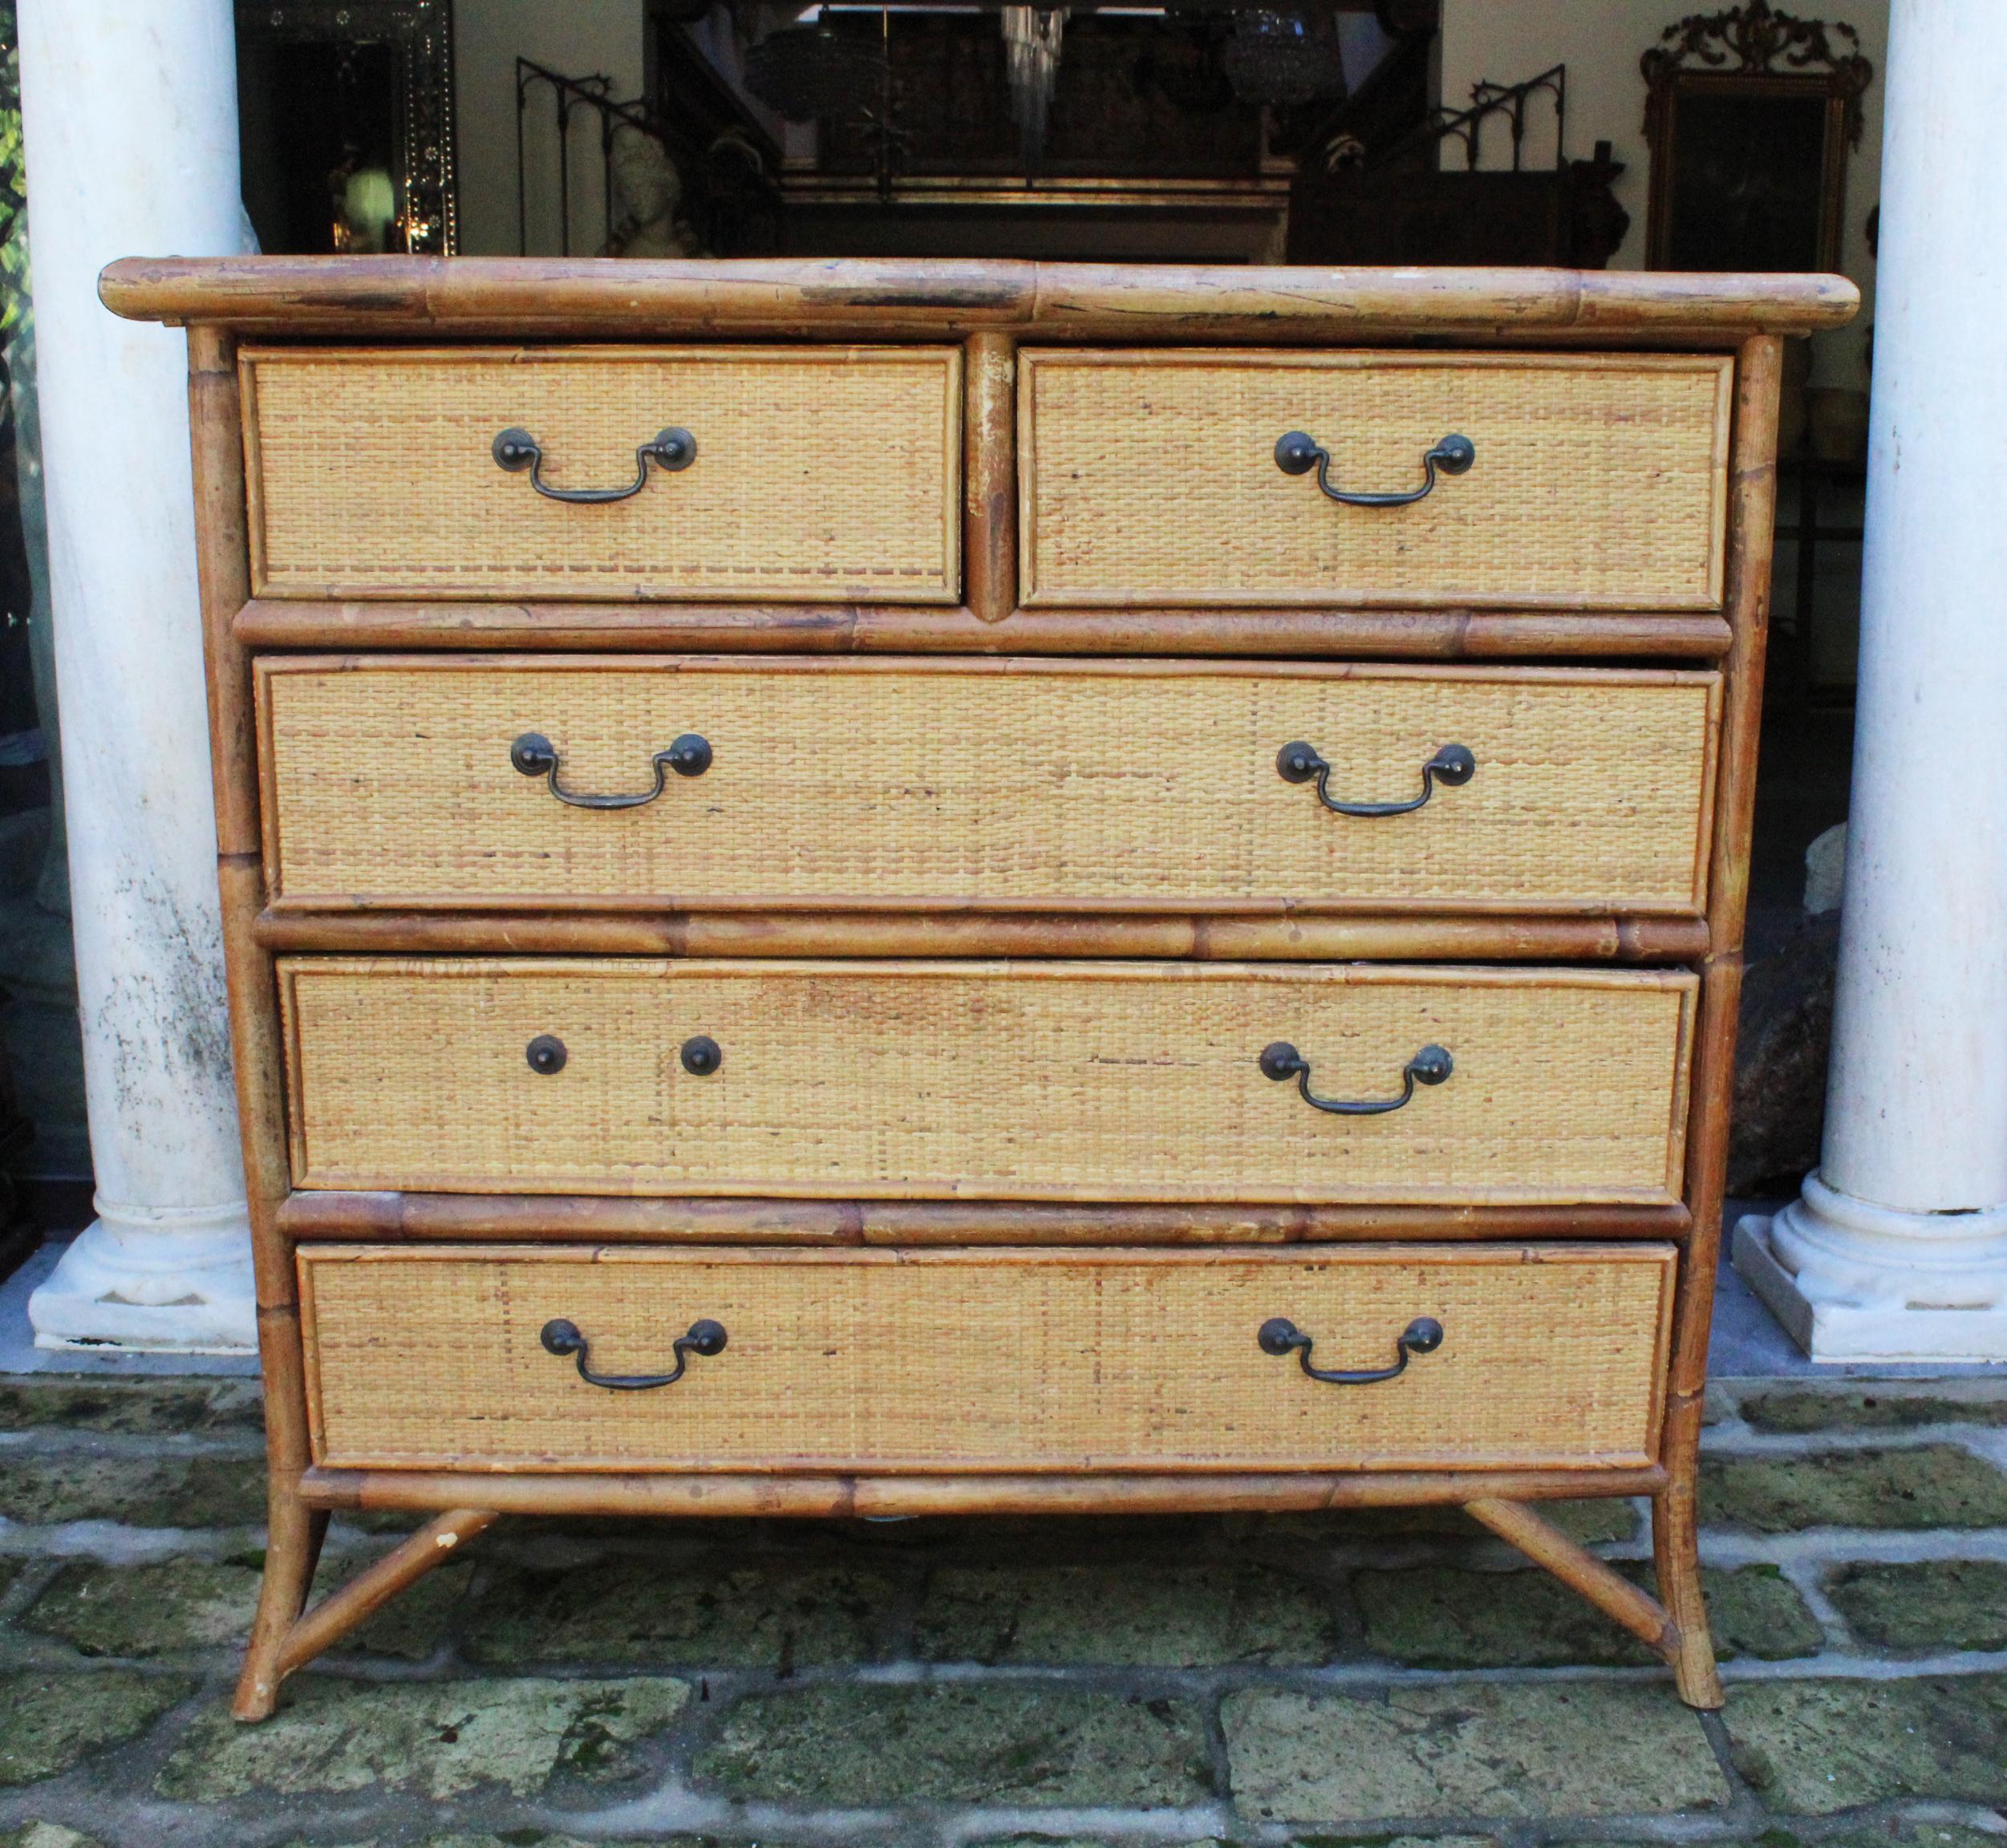 1950s Spanish cane and lazed wicker chest of drawers. One handle is missing.